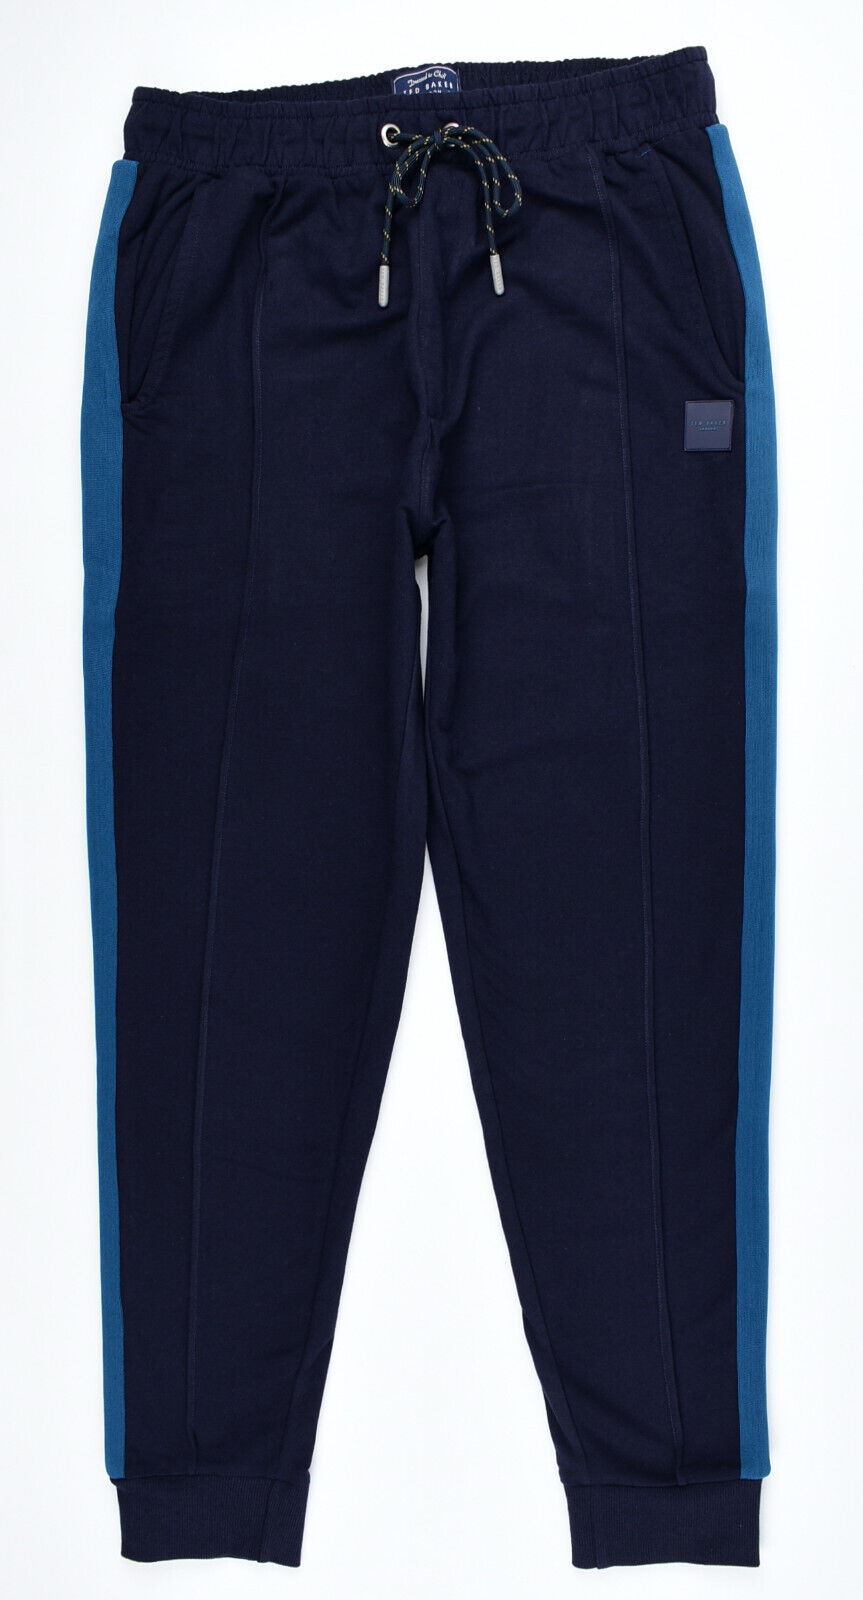 TED BAKER Men's French Terry Joggers, Lounging Pants, Navy Blue, Ted size 2 /S